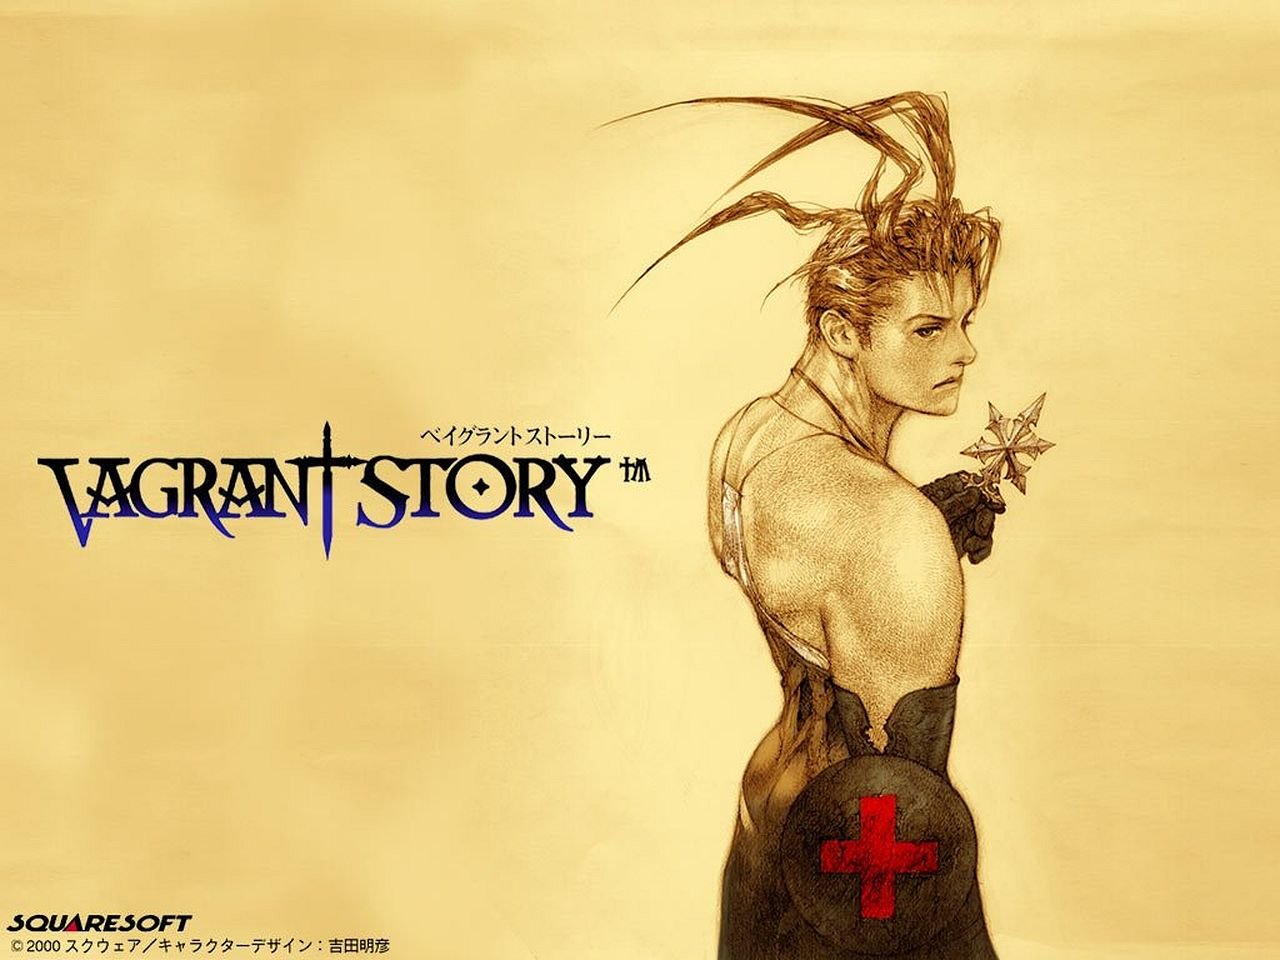 Vagrant Story Computer Wallpapers Desktop Backgrounds 1280x960 ID